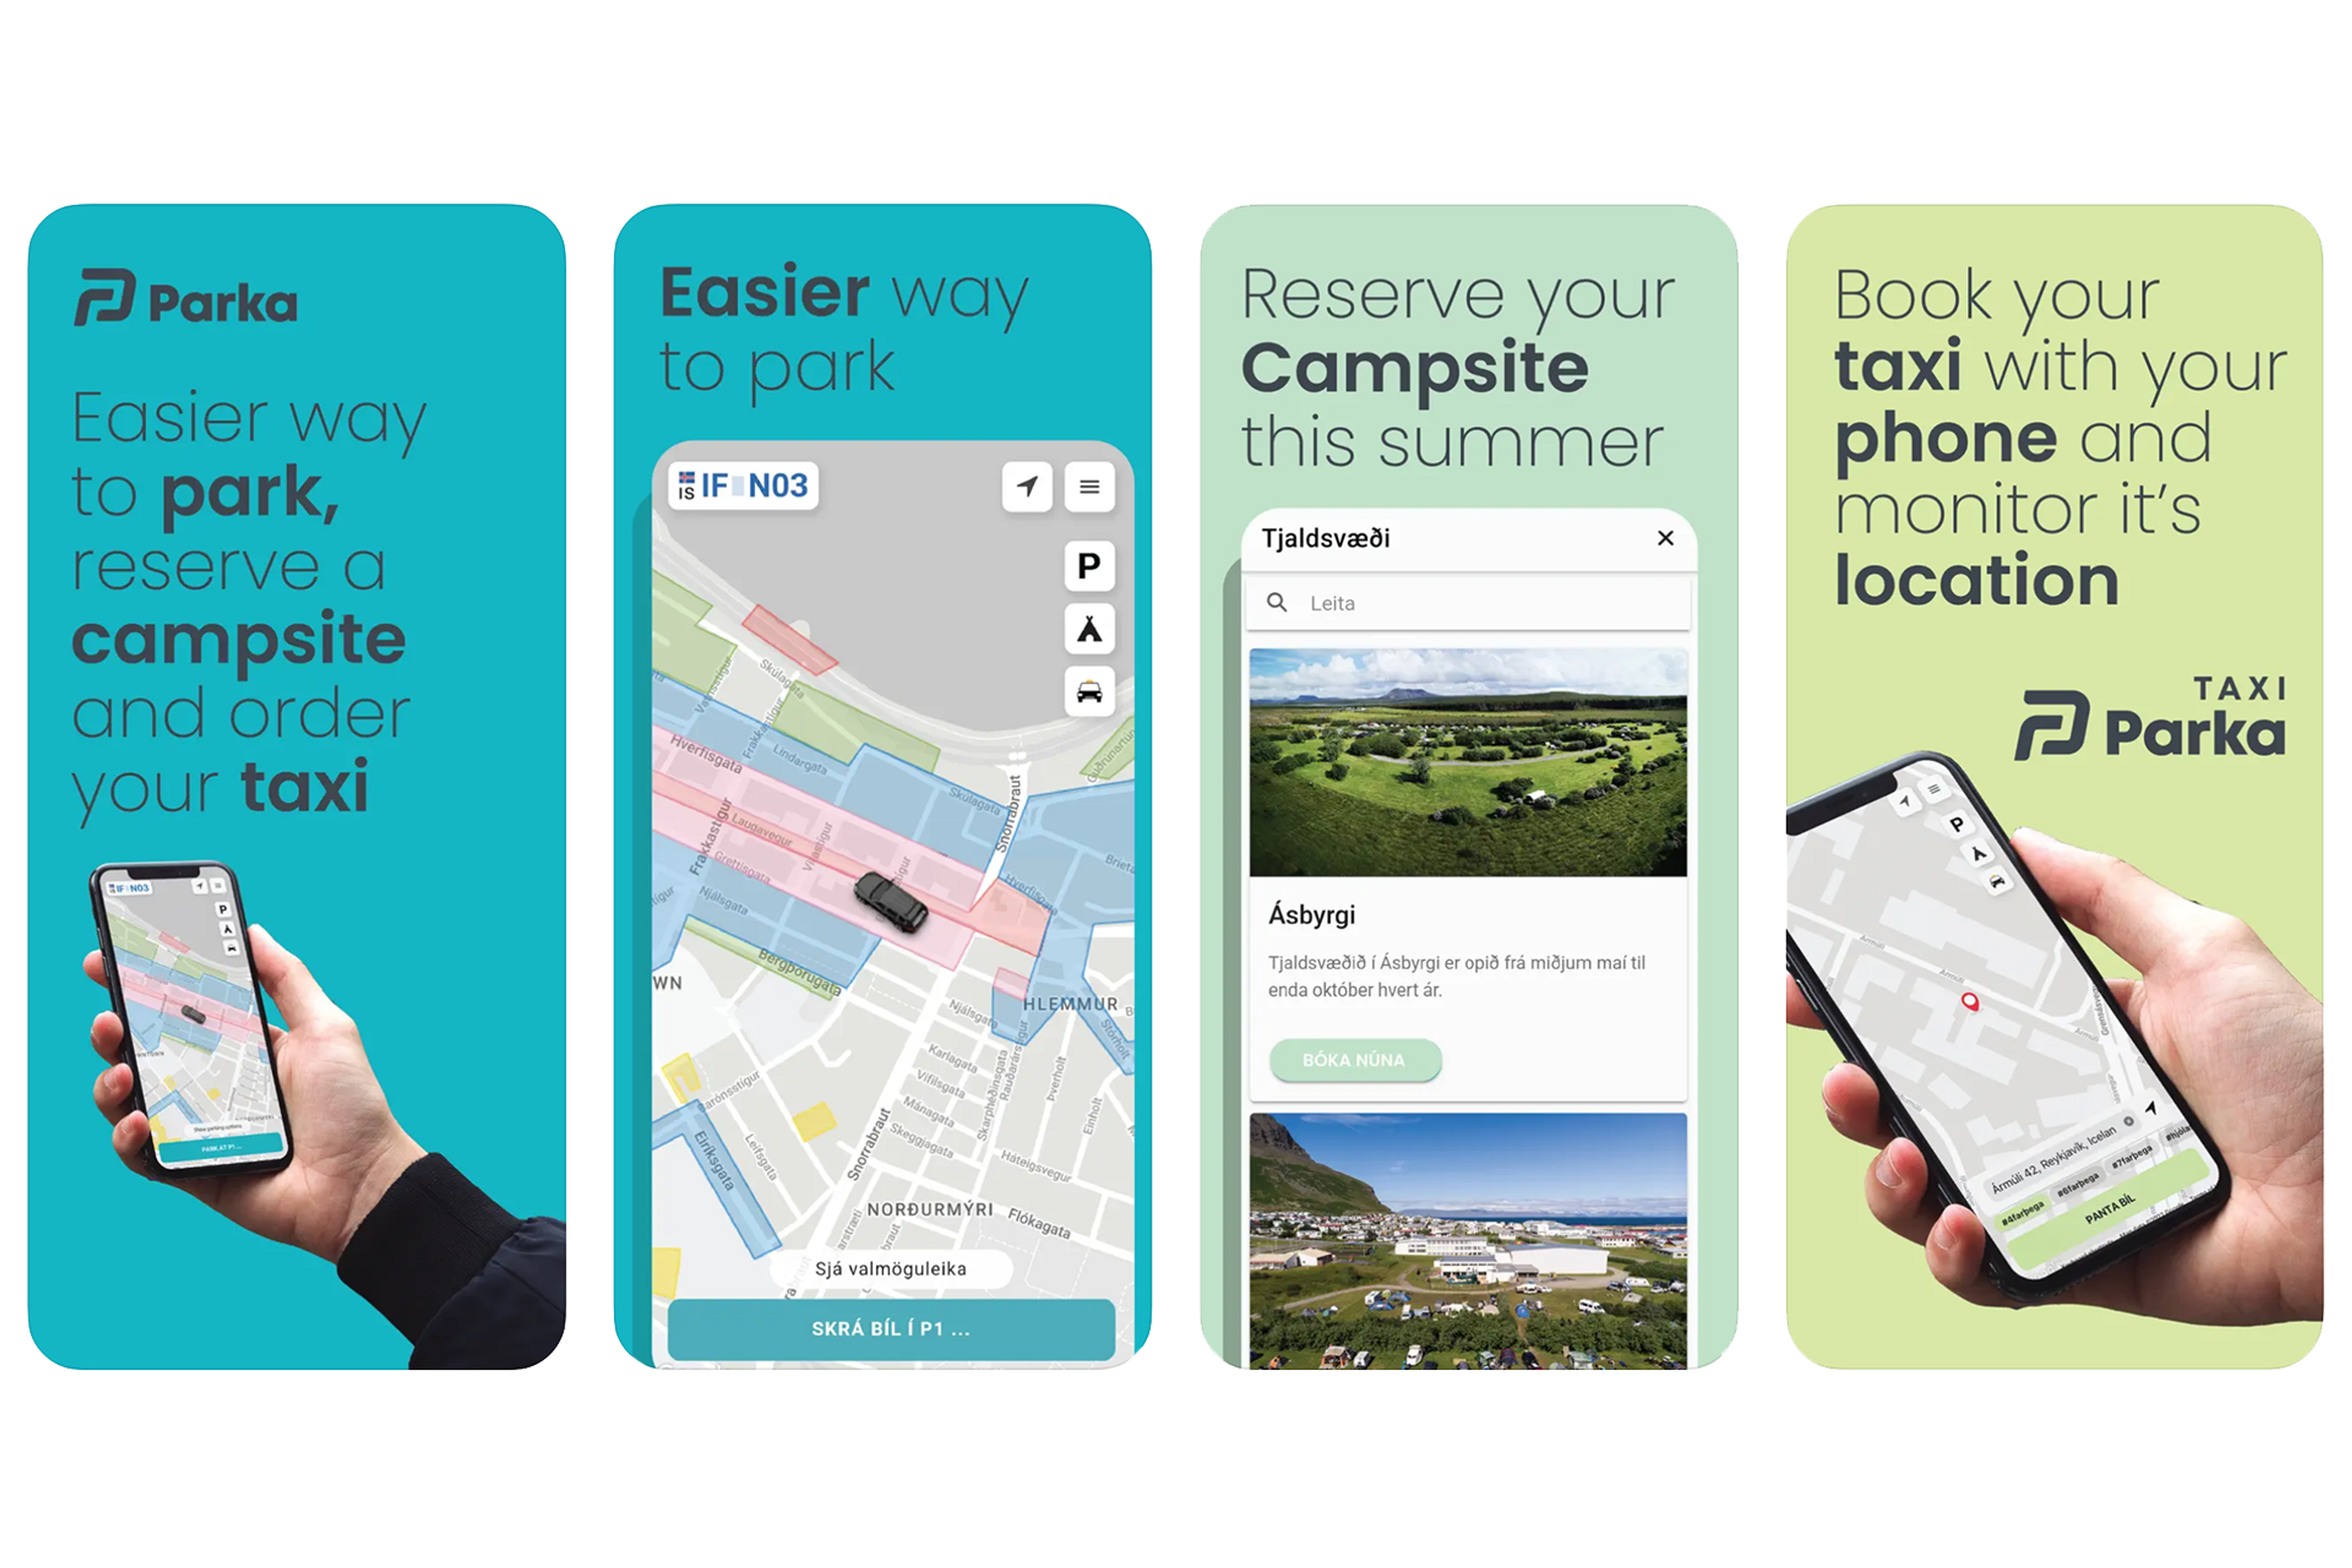 Parka app offers users a simple and fast way to pay for parking within the city of Reykjavík and in Icelandic national parks.